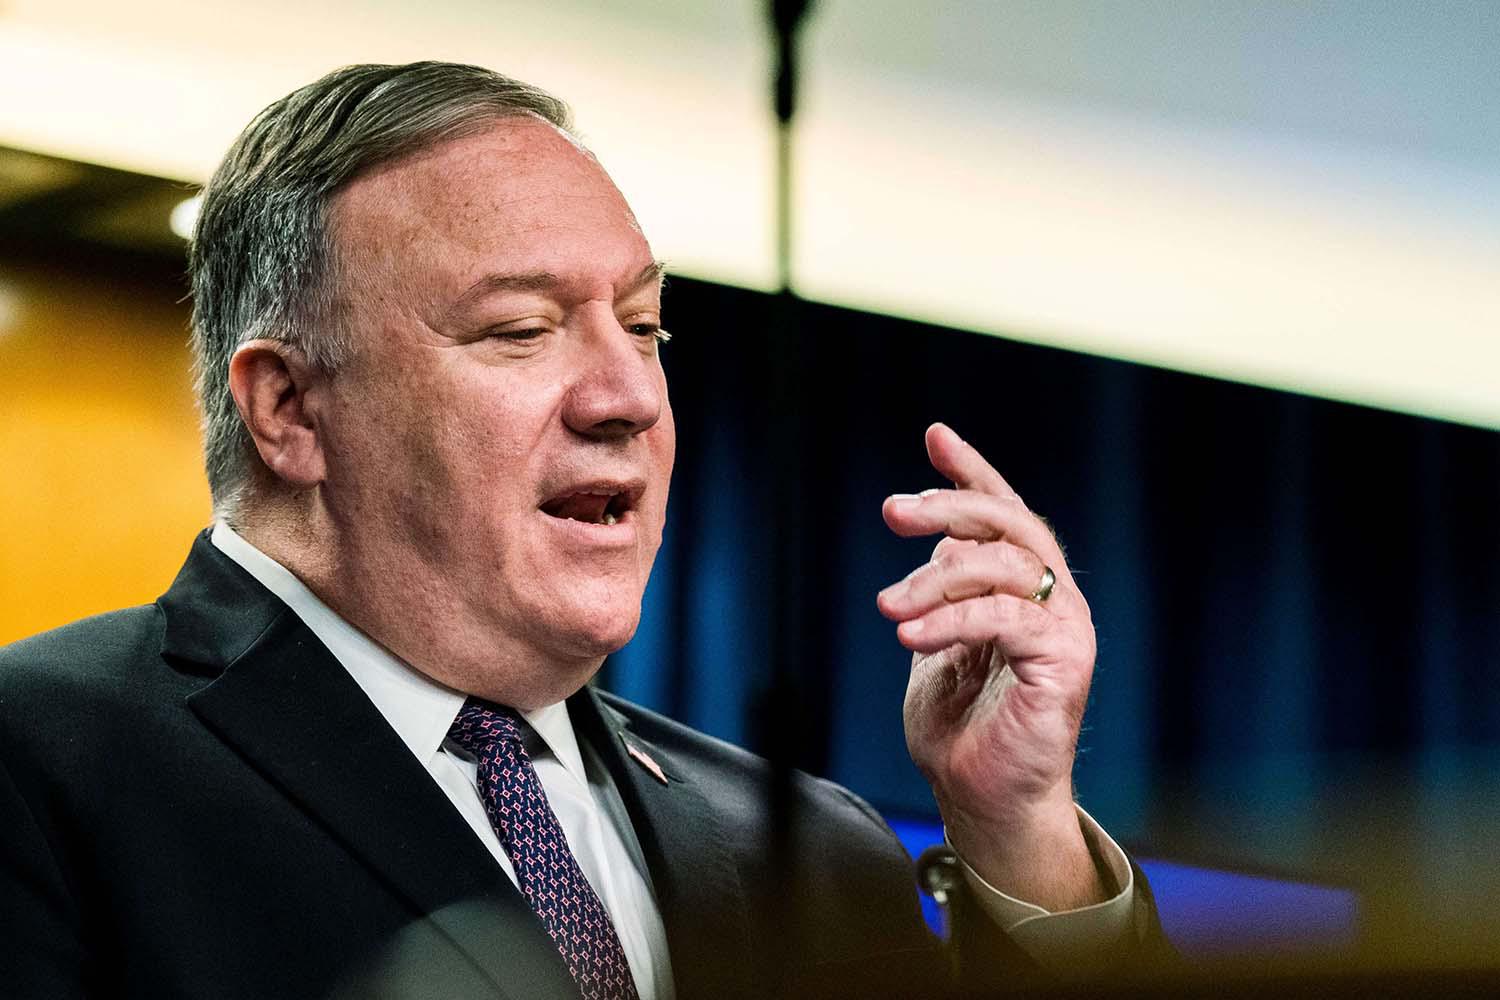 Pompeo warned that arms sales to Iran would breach UN resolutions and result in sanctions